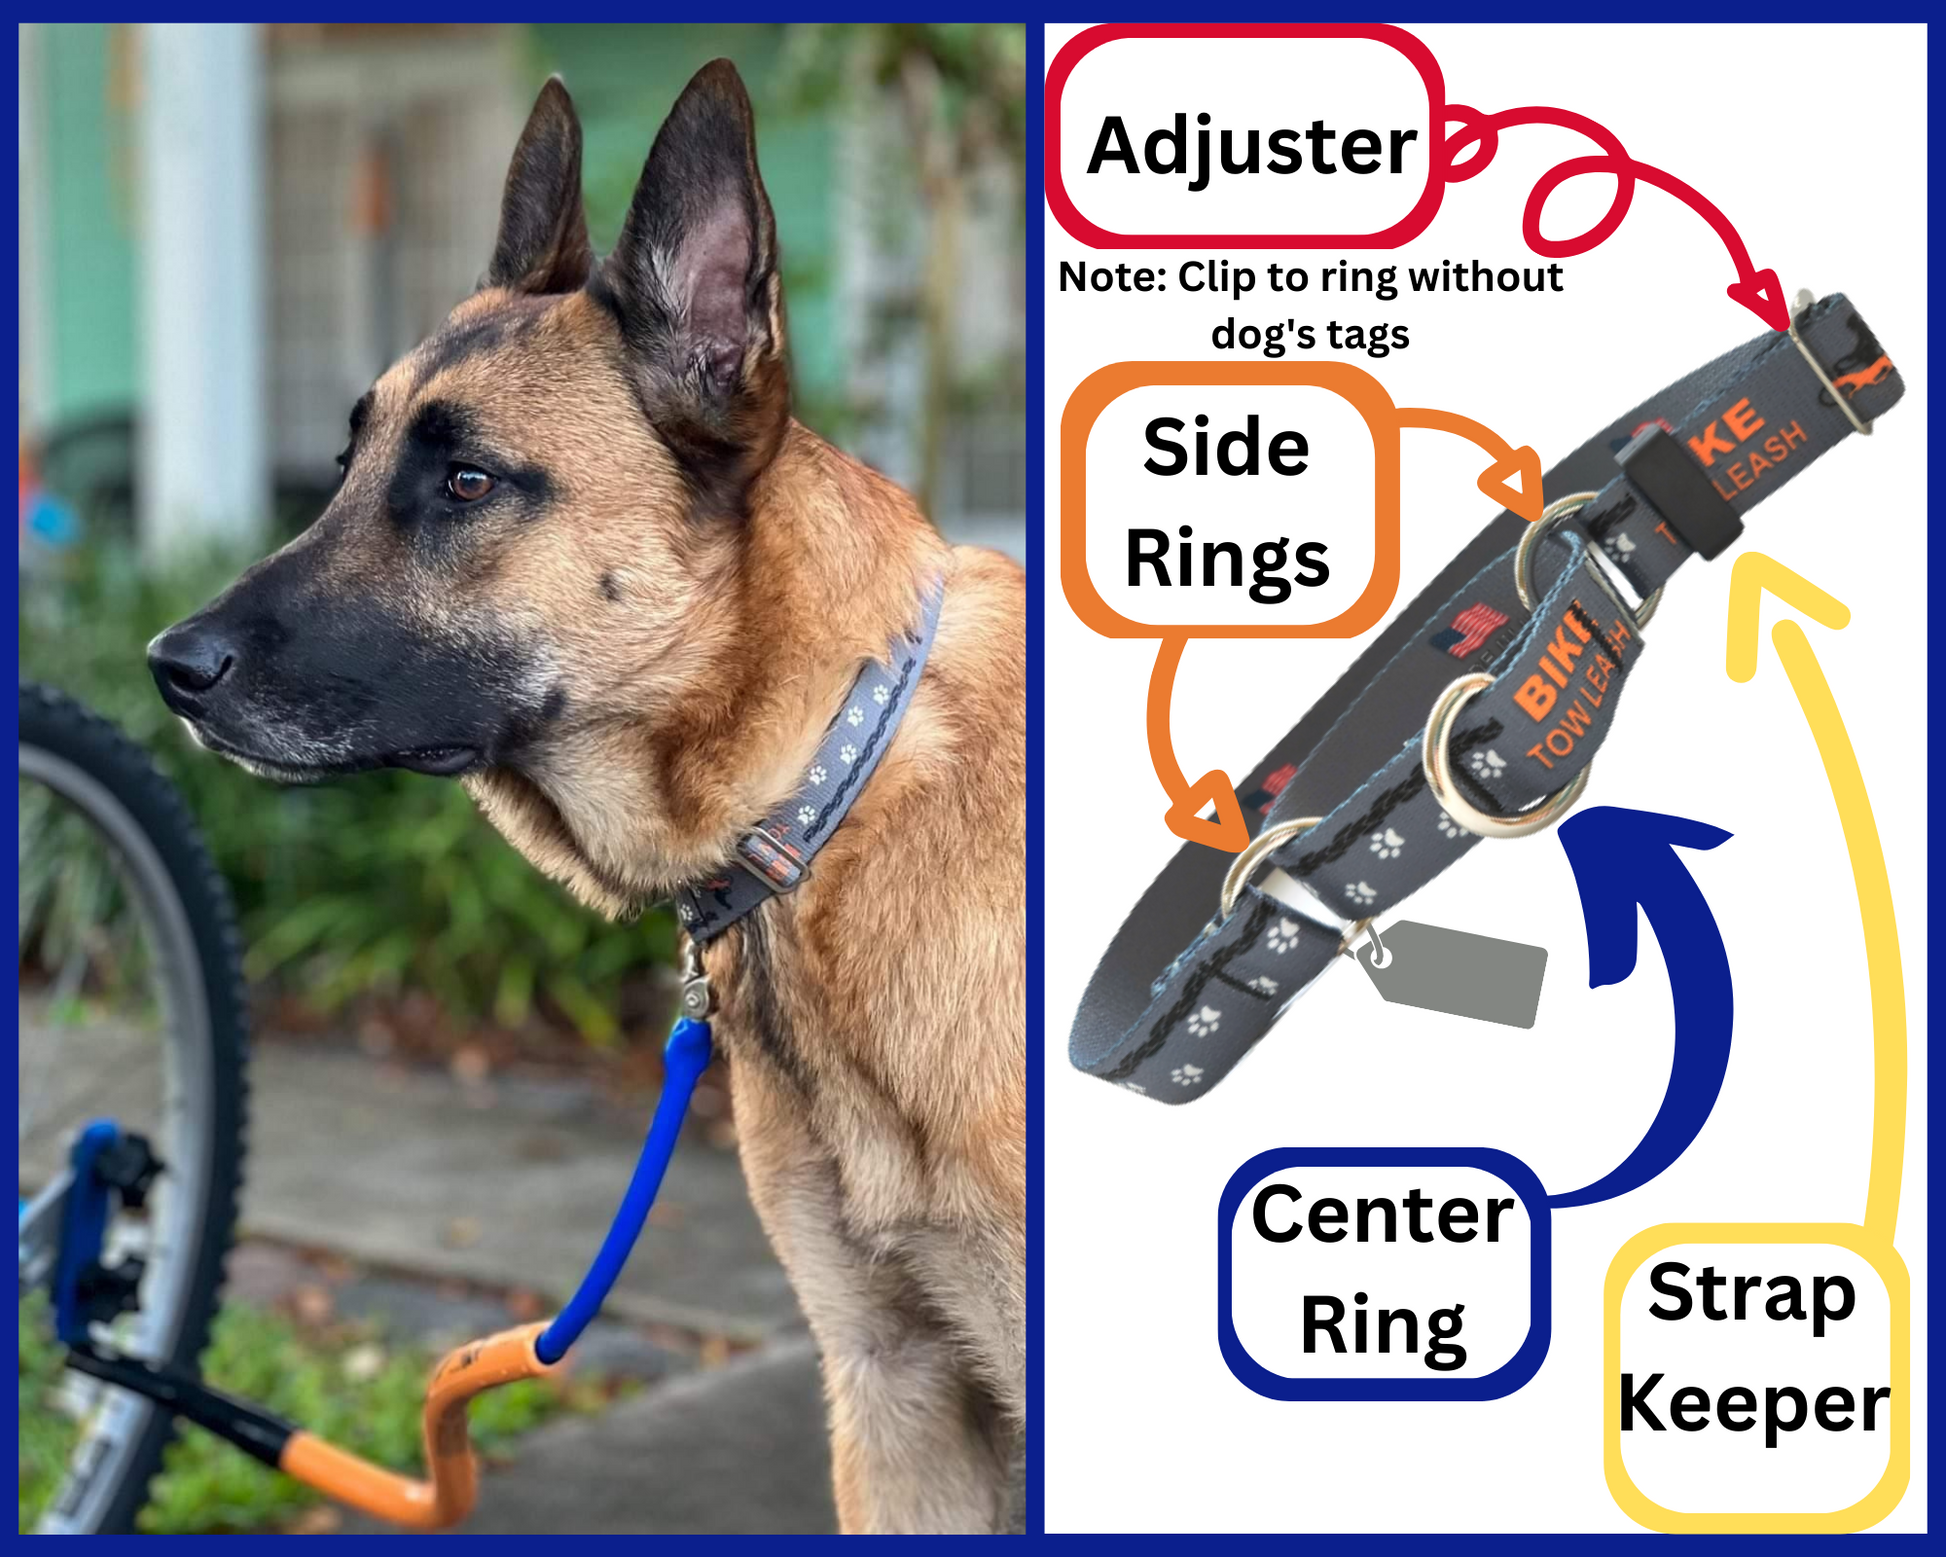 A dog on the Left wearing the Bike Tow Leash Collar clipped to the BTL & a diagram on the right 